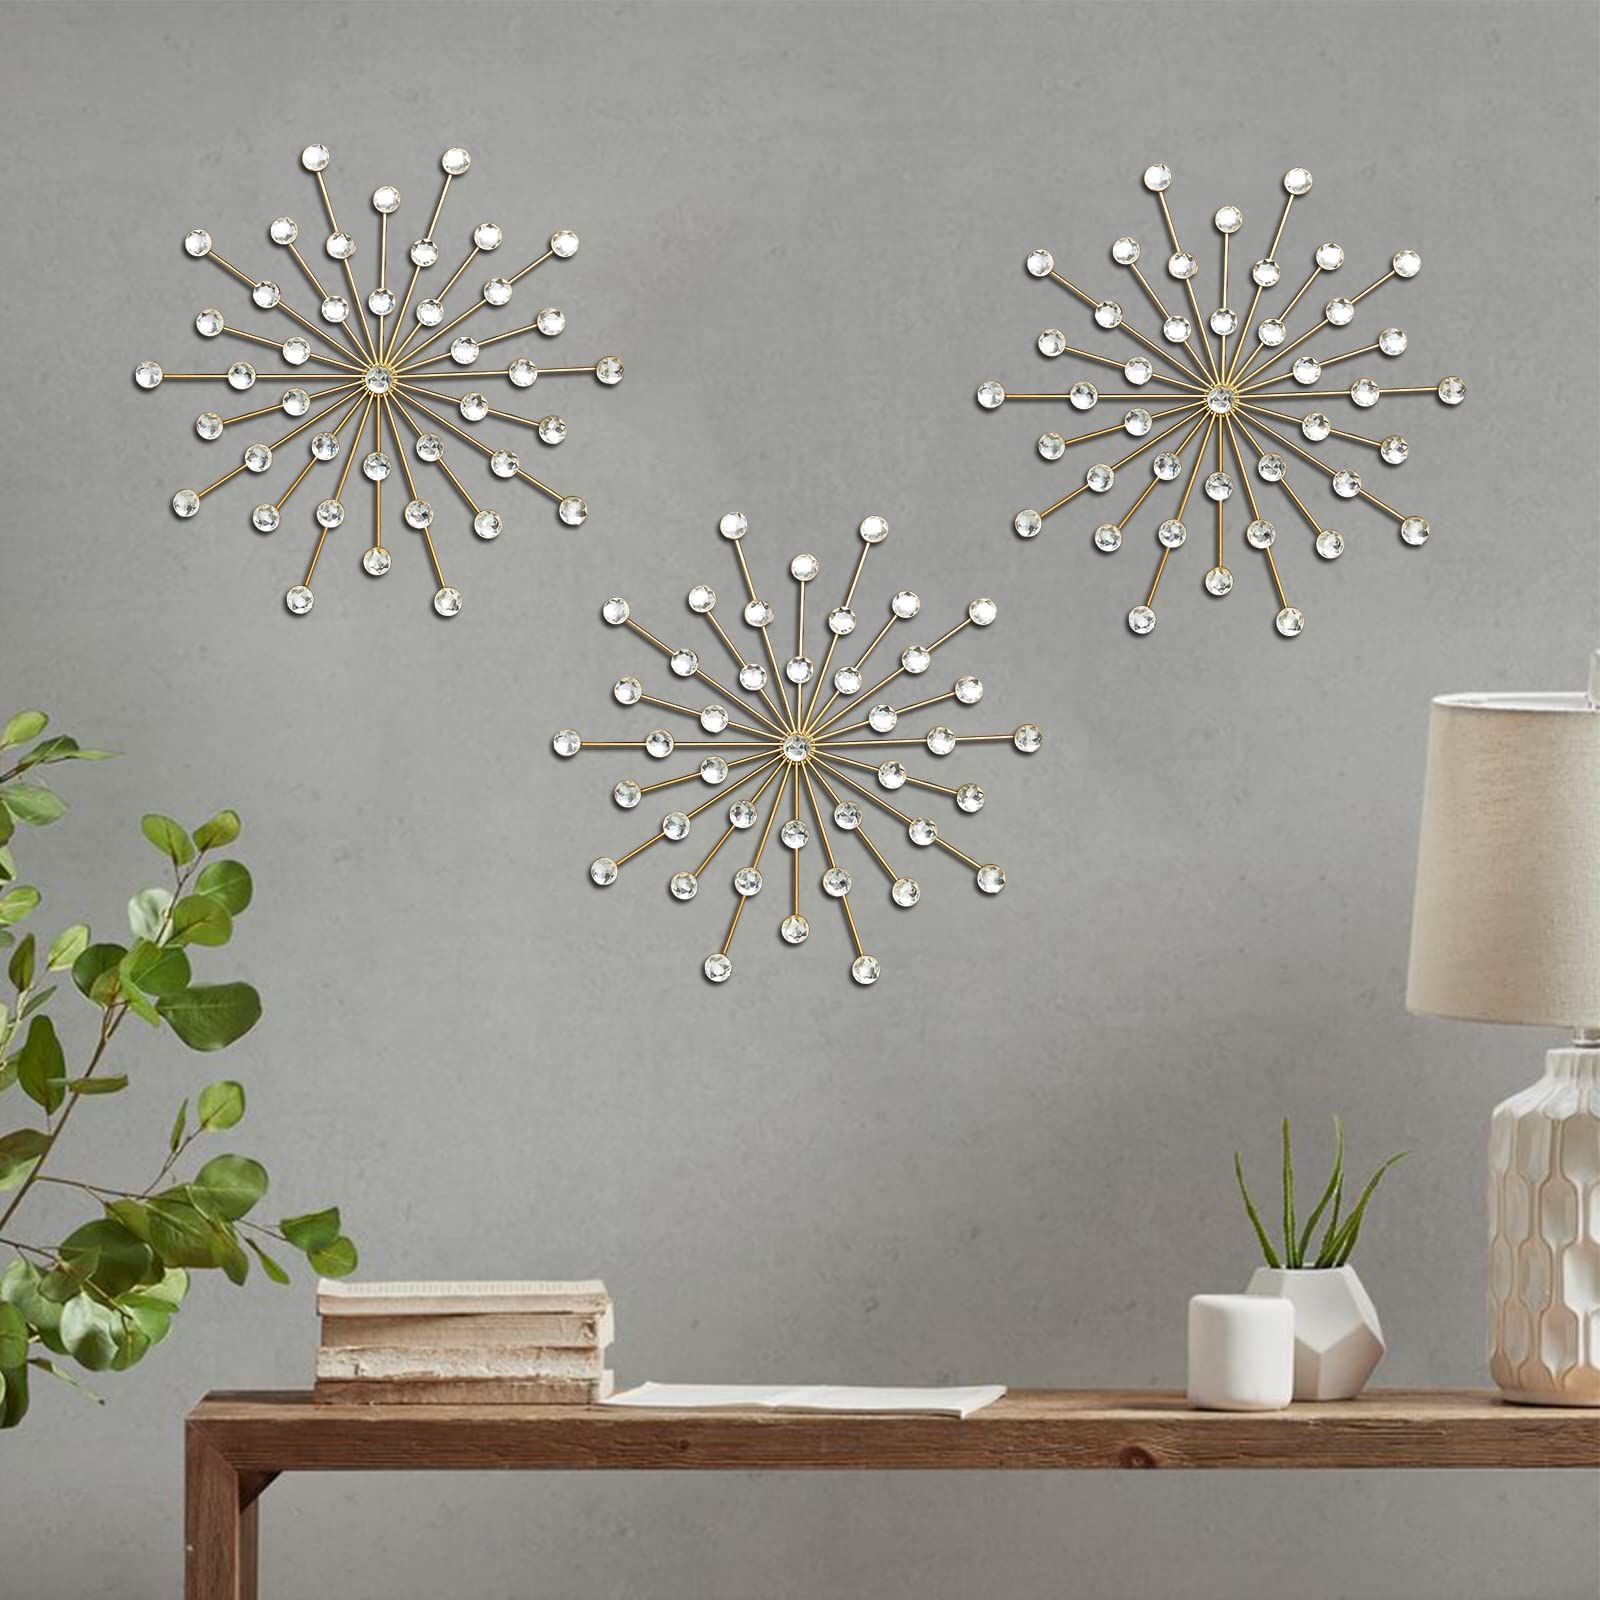 Featured Photo of 15 Best Ideas Starburst Jeweled Hanging Wall Art